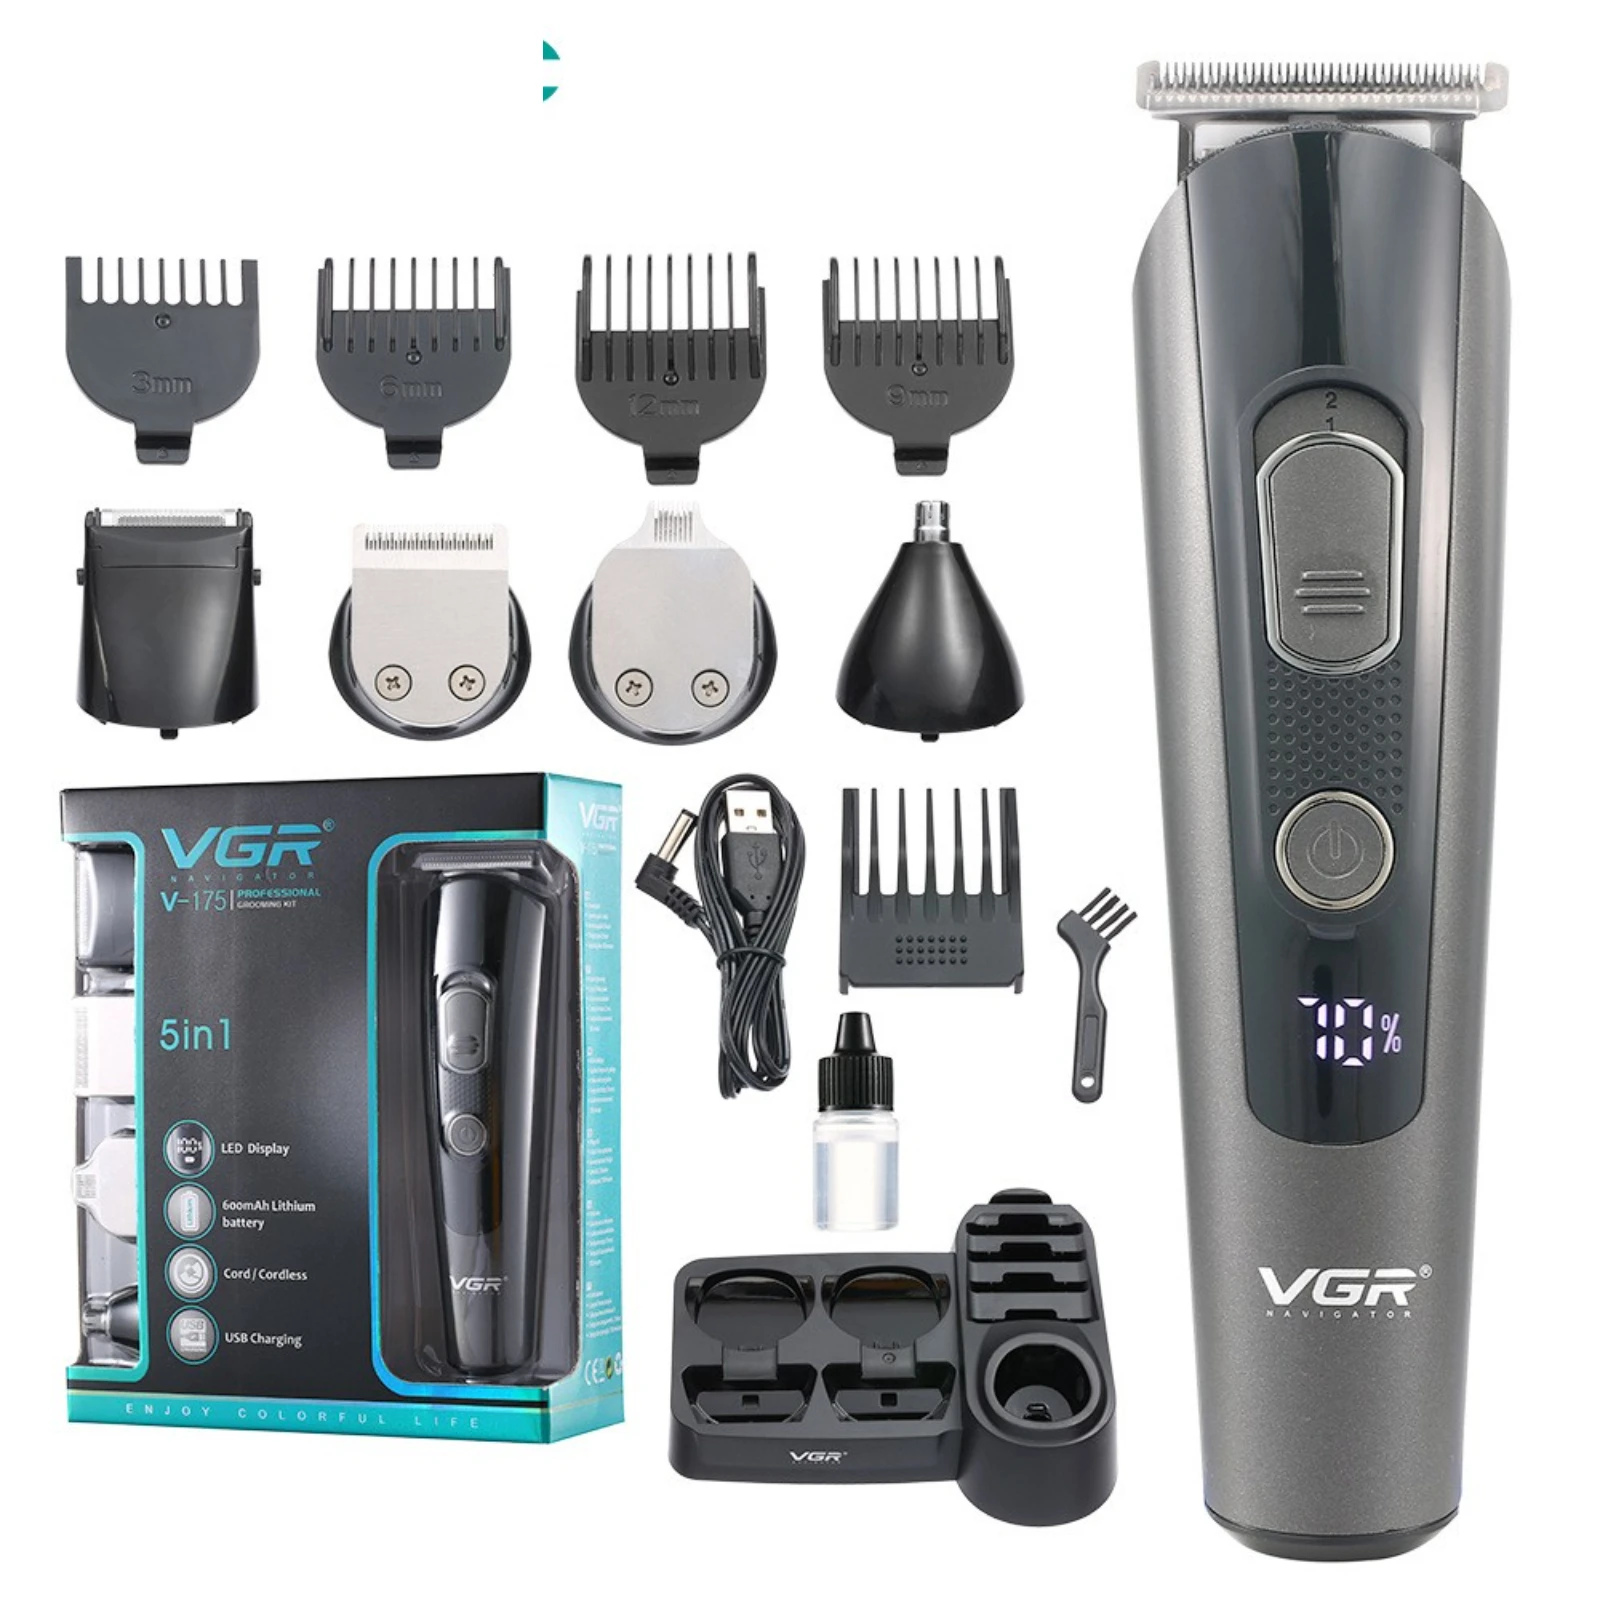 

V-175 Grooming Kit Professional Nose Hair Trimmer Electric Shaver Cordless Hair Cutting Machine Hair Clipper Trimmer for Men